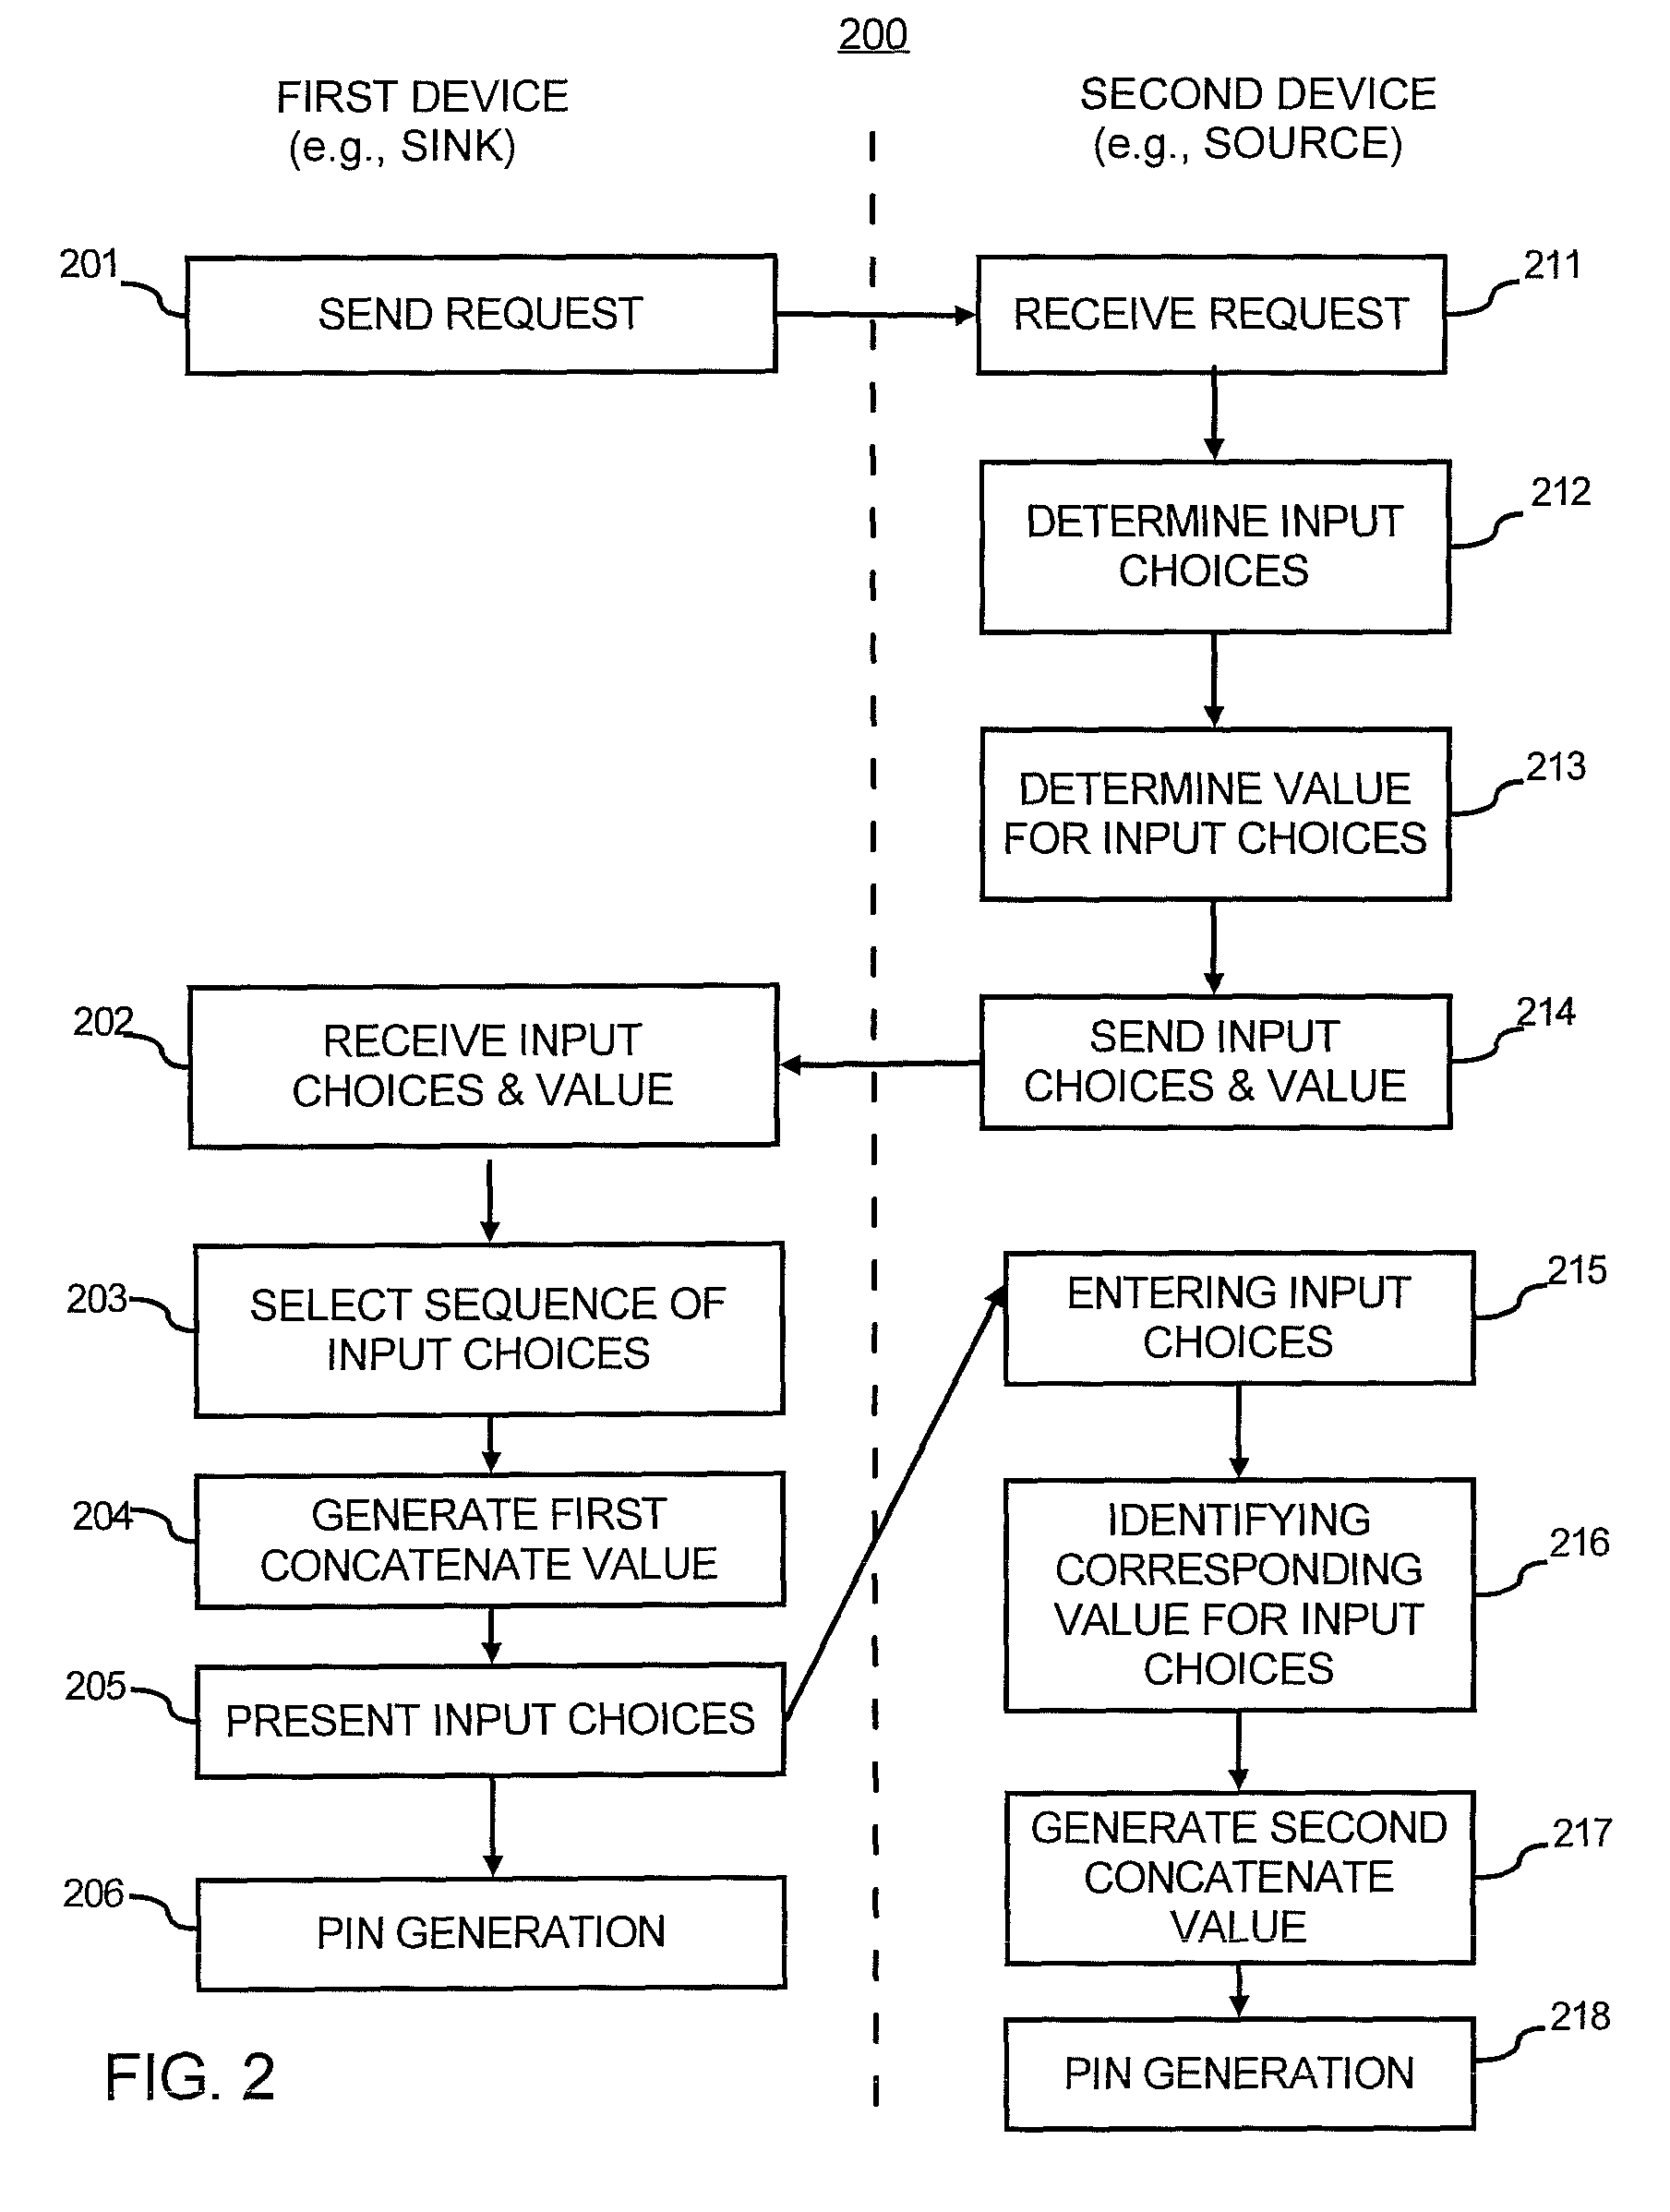 Personal identification number (PIN) generation between two devices in a network